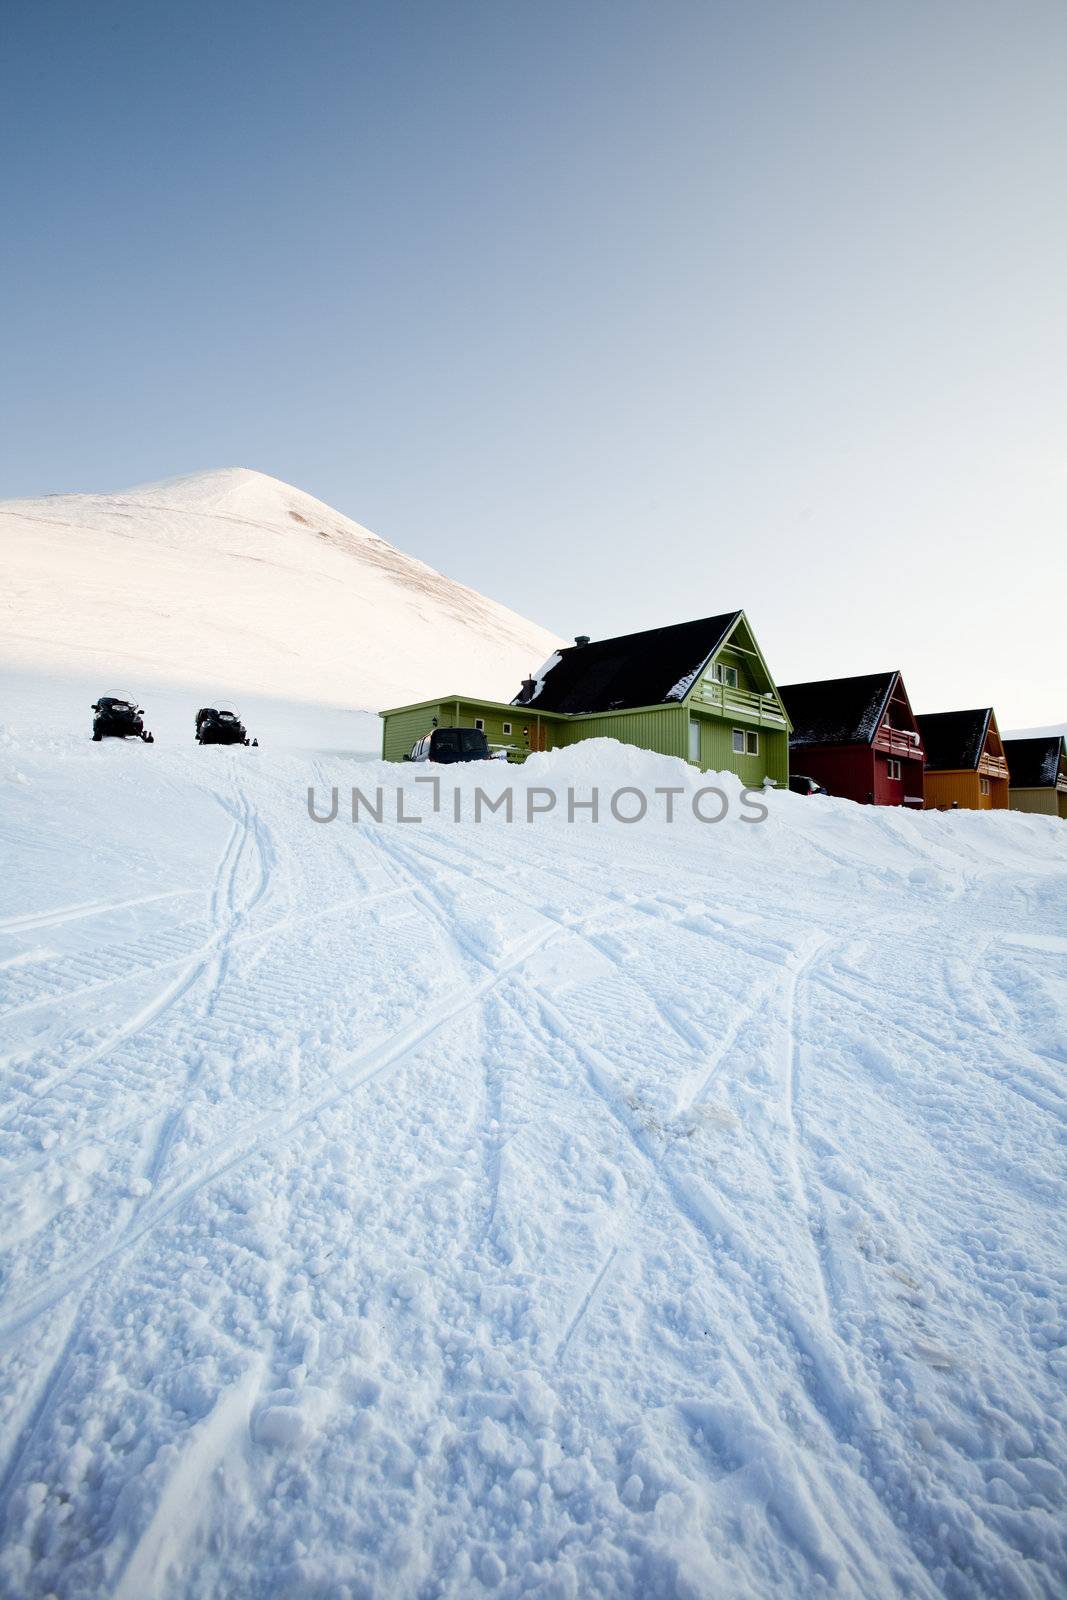 A detail of Longyearbyen, Svalbard, Norway.  A row of houses and a mountain in the distance.